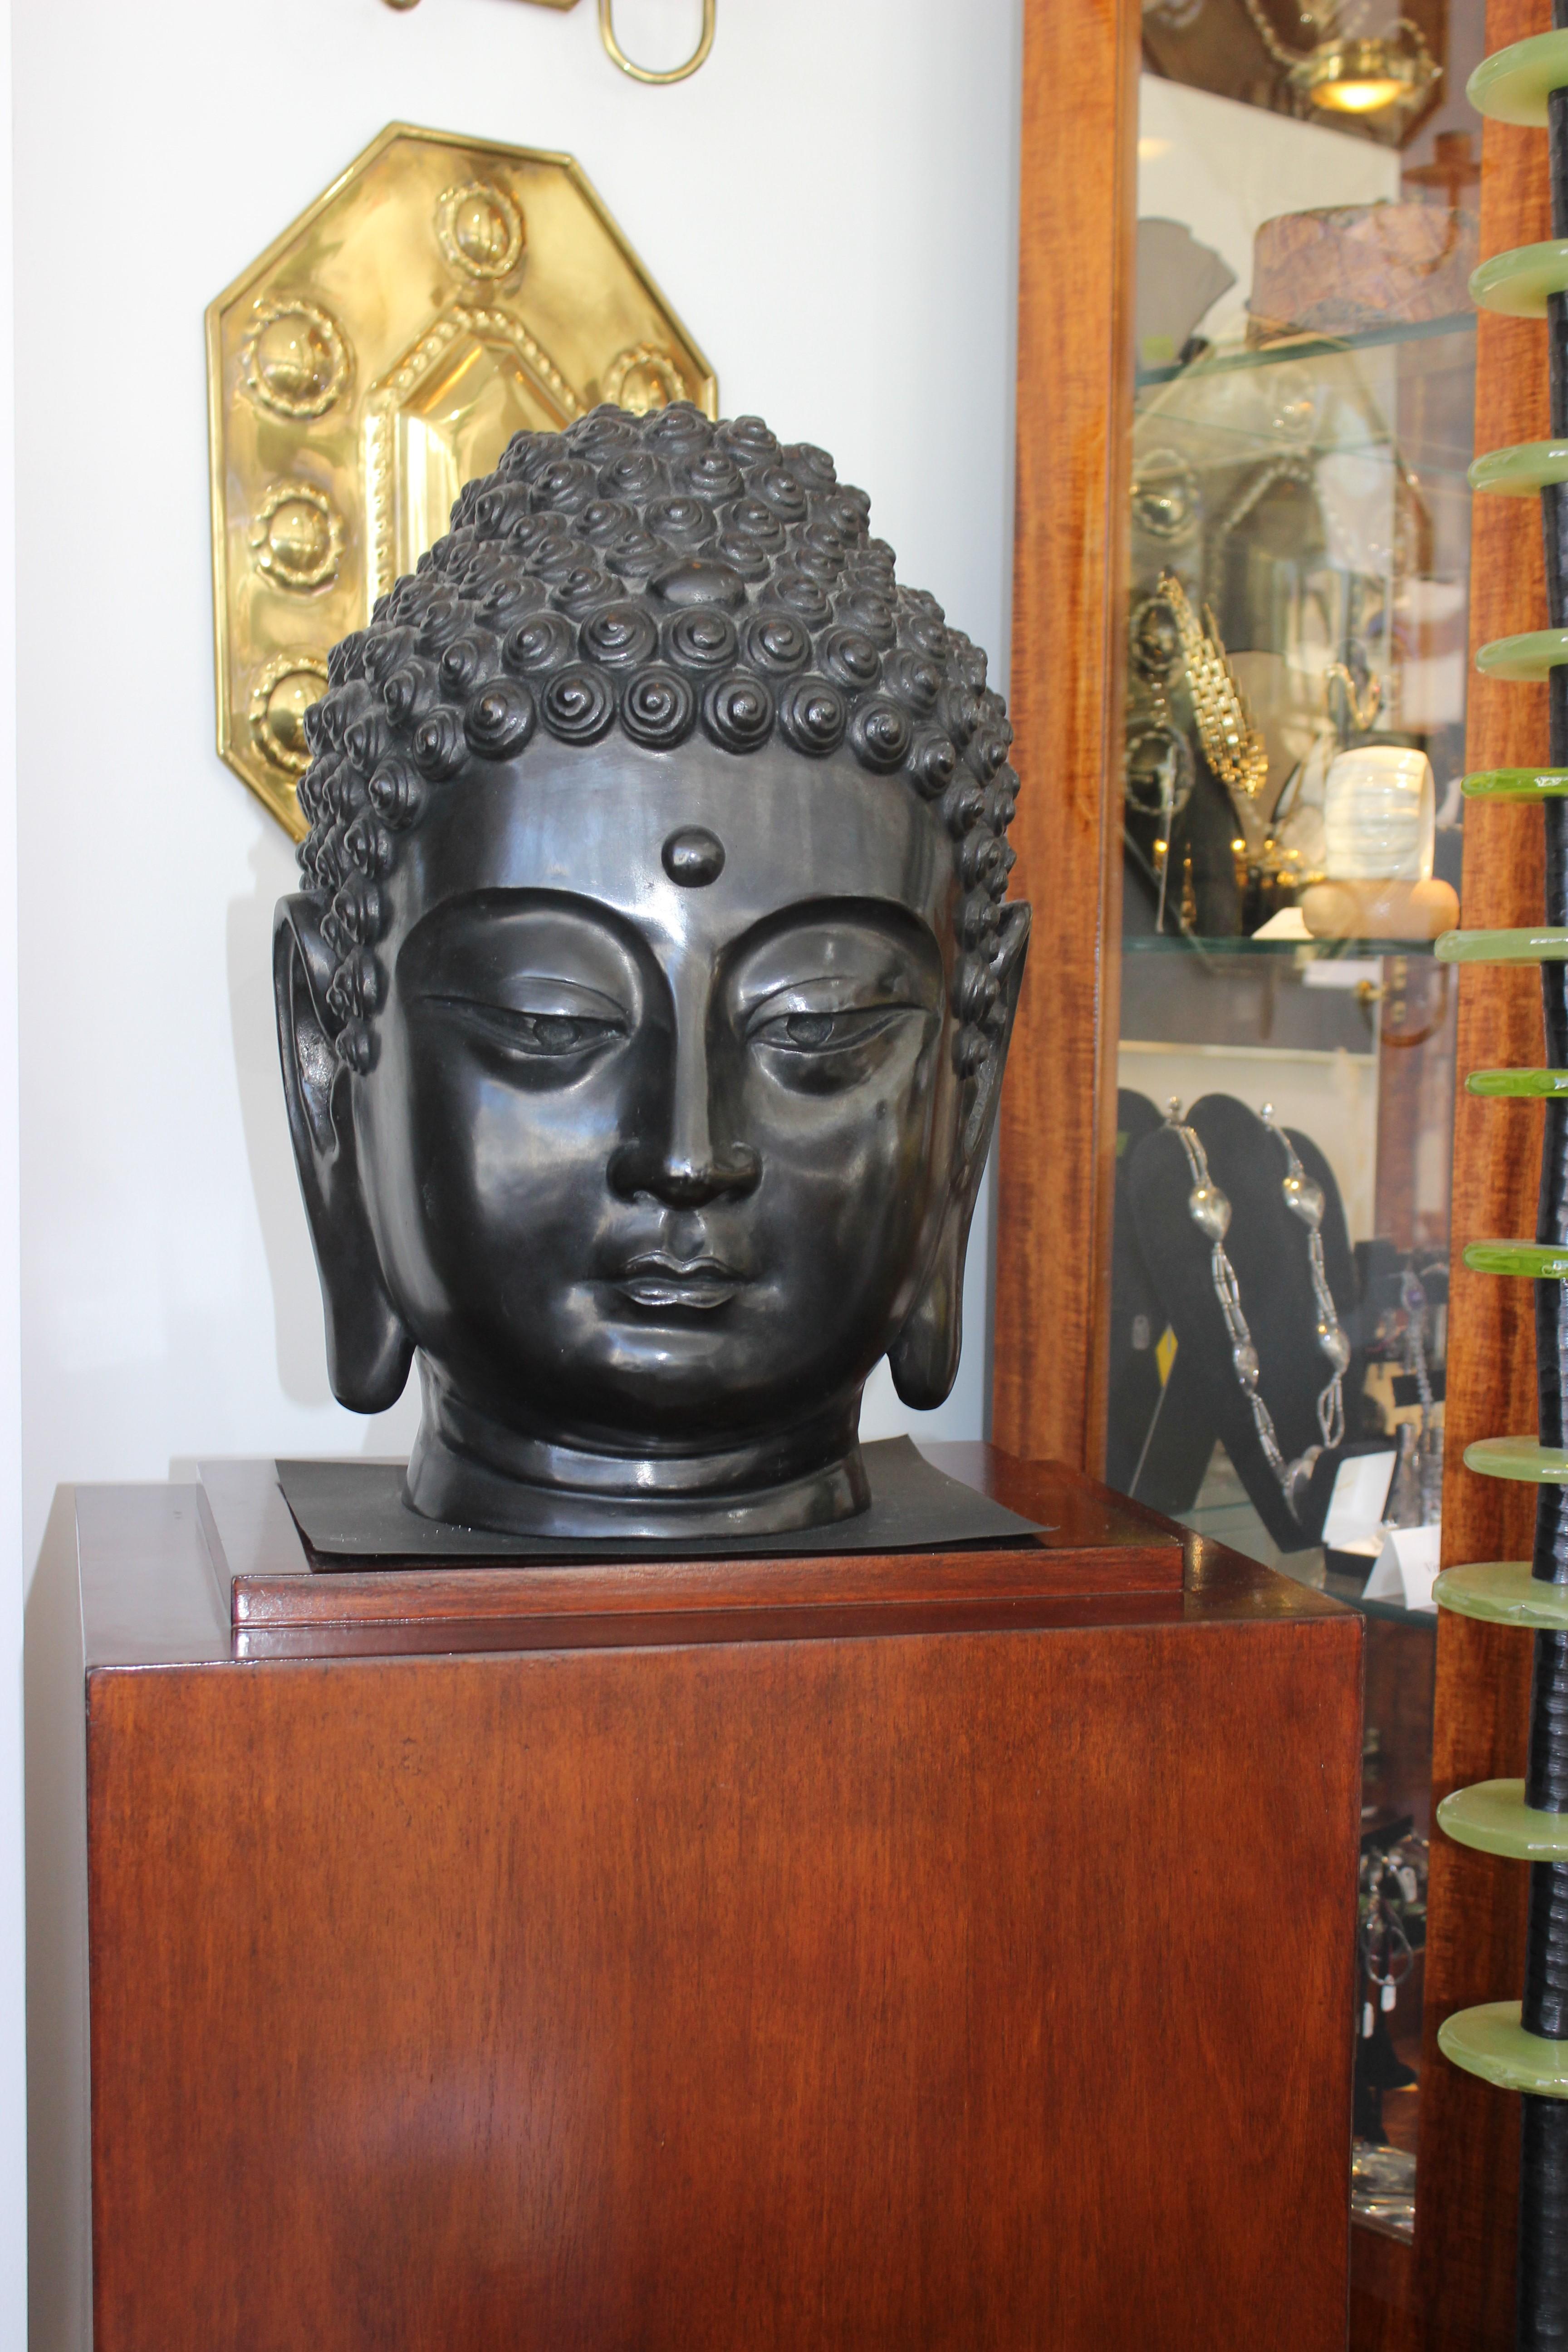 Vintage 17 inch bronze Buddha sculpture from a Palm Beach estate
Signed by Artist With Third Eye and Pure Land Motif.